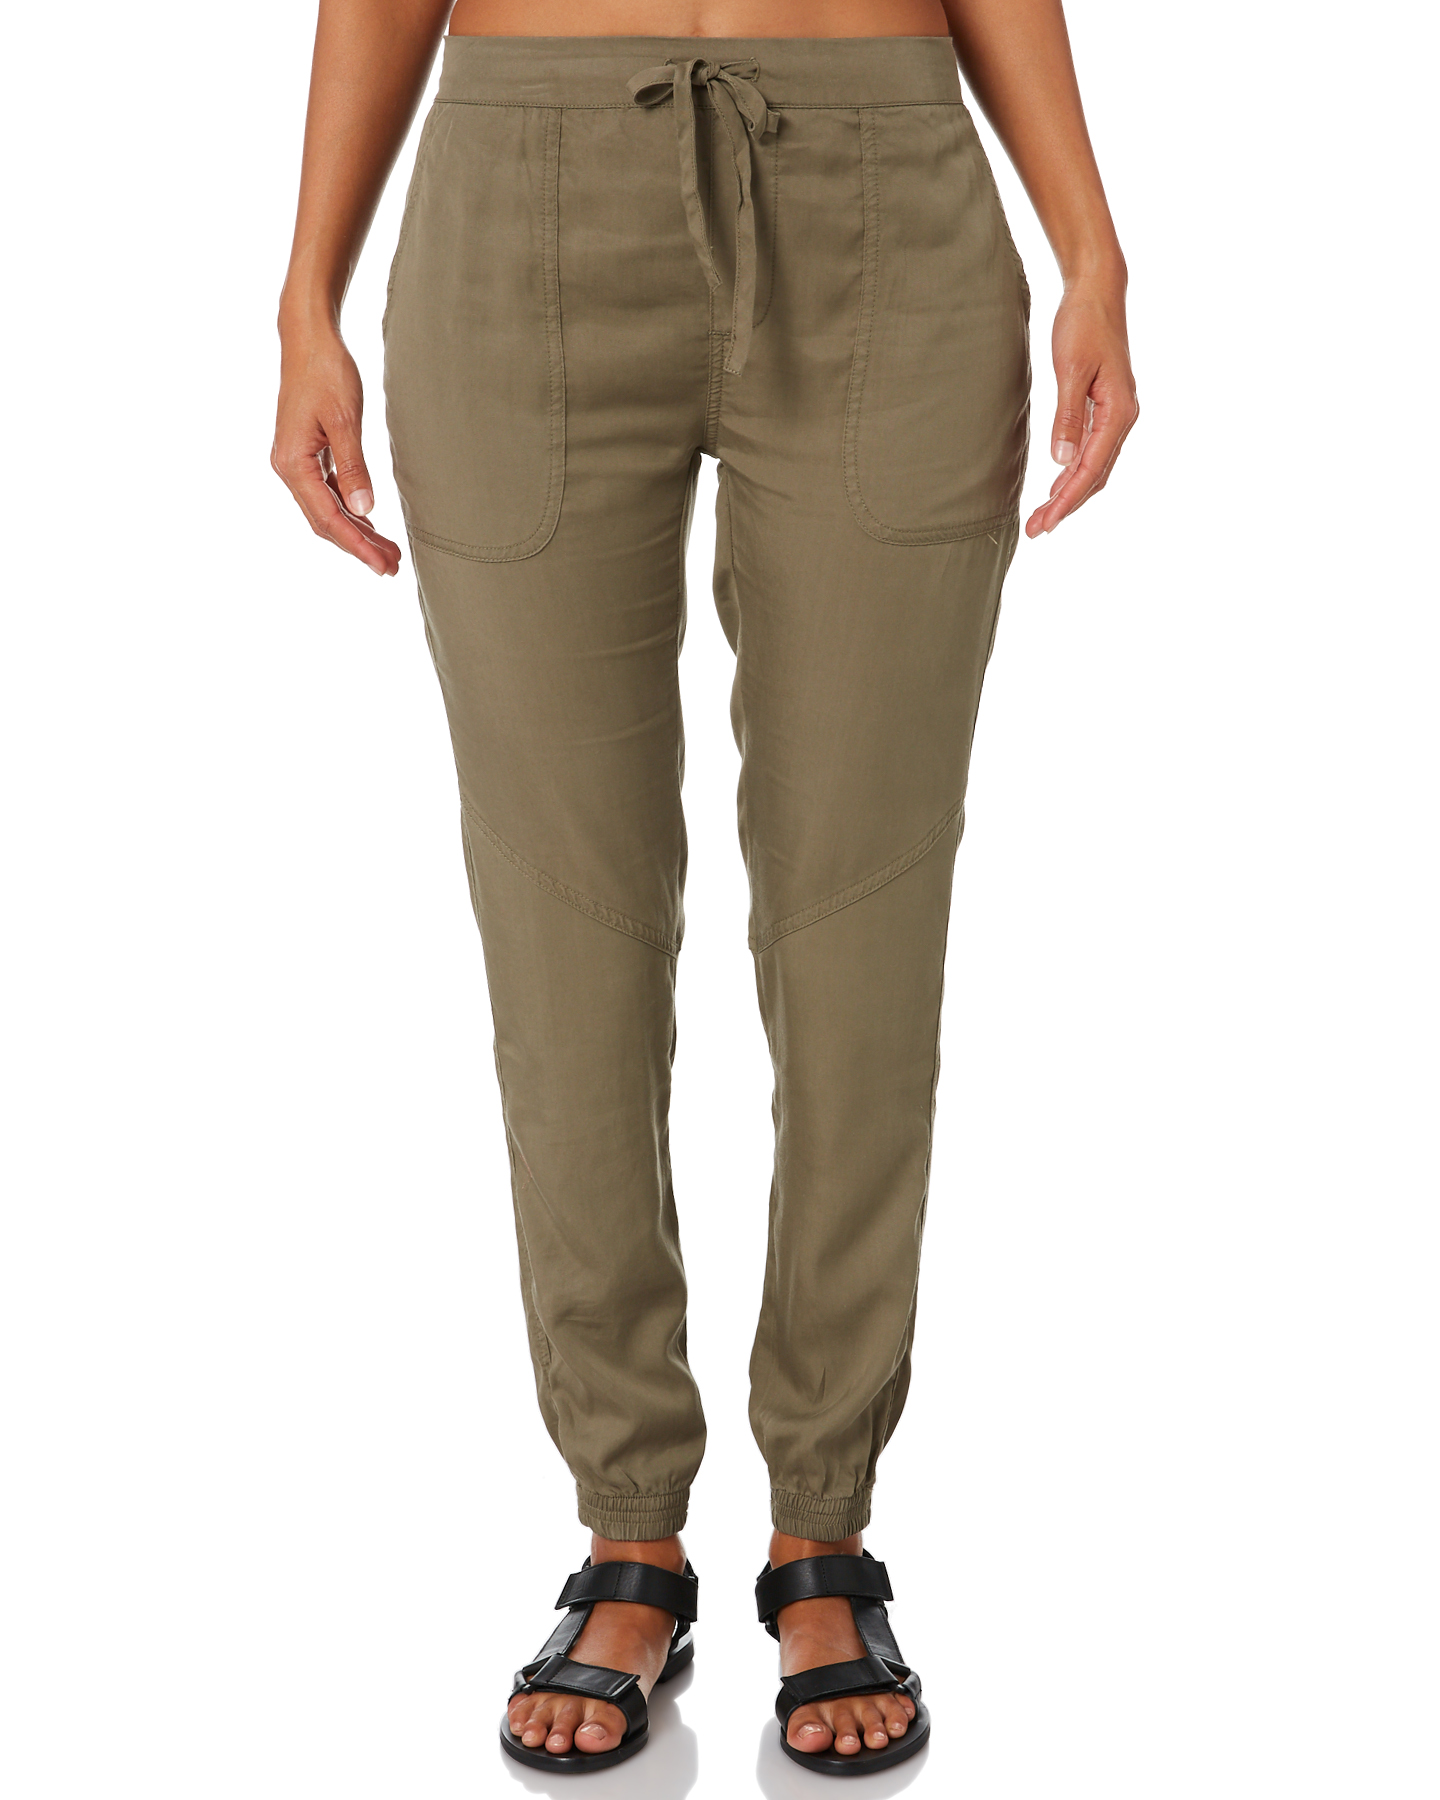 Rusty Bounds Pant - Faded Olive | SurfStitch